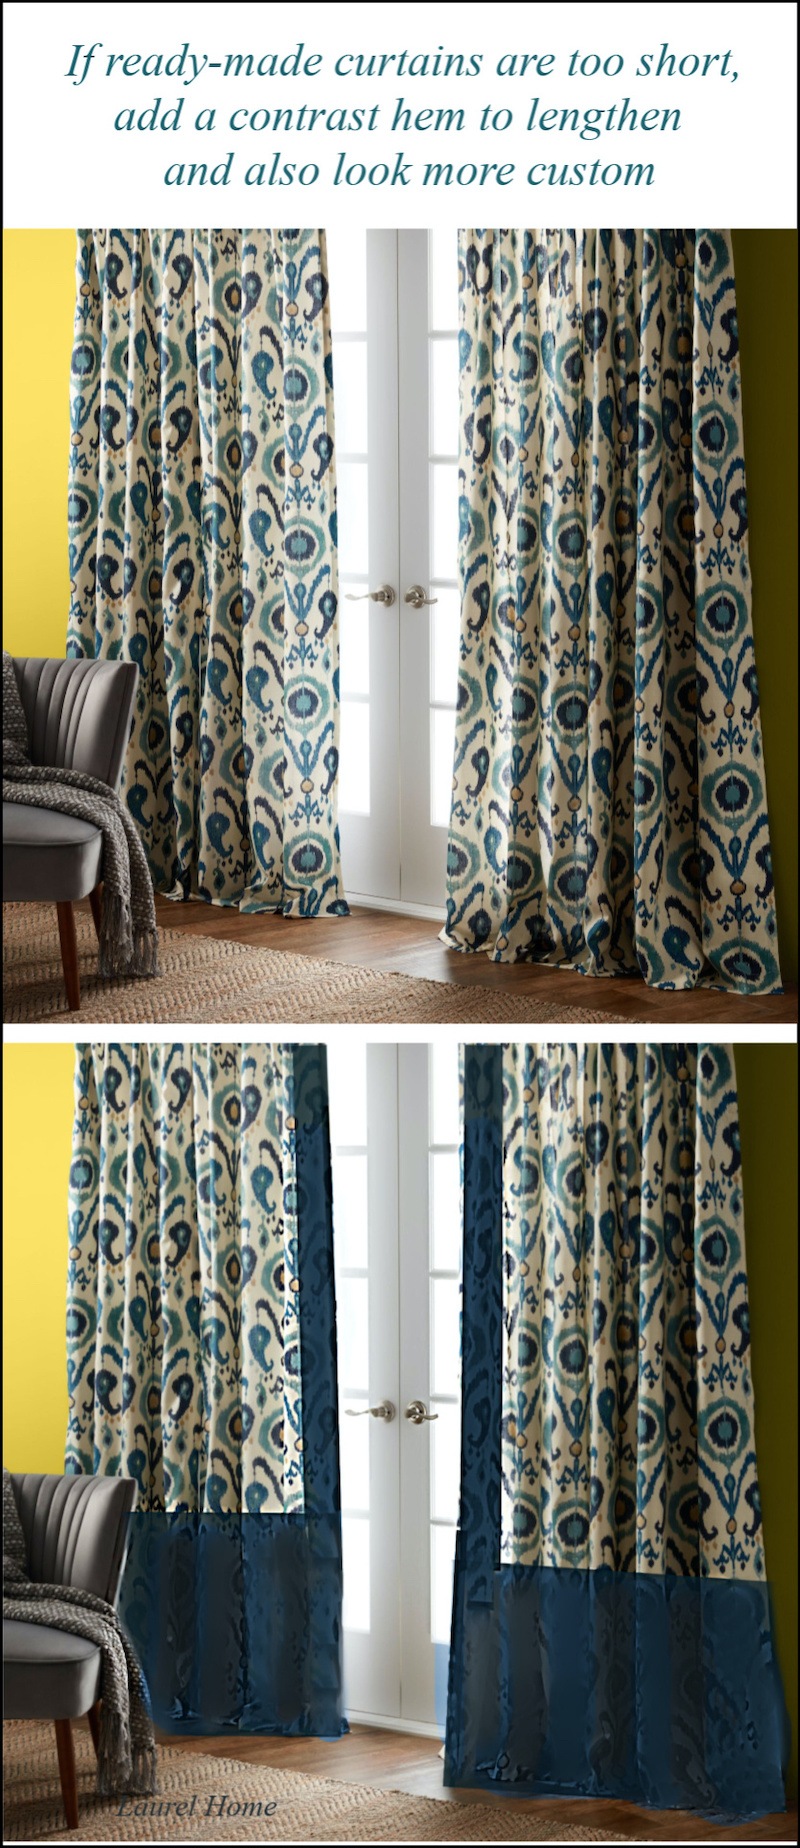 before and after contrast hem - budget window treatments - look expensive